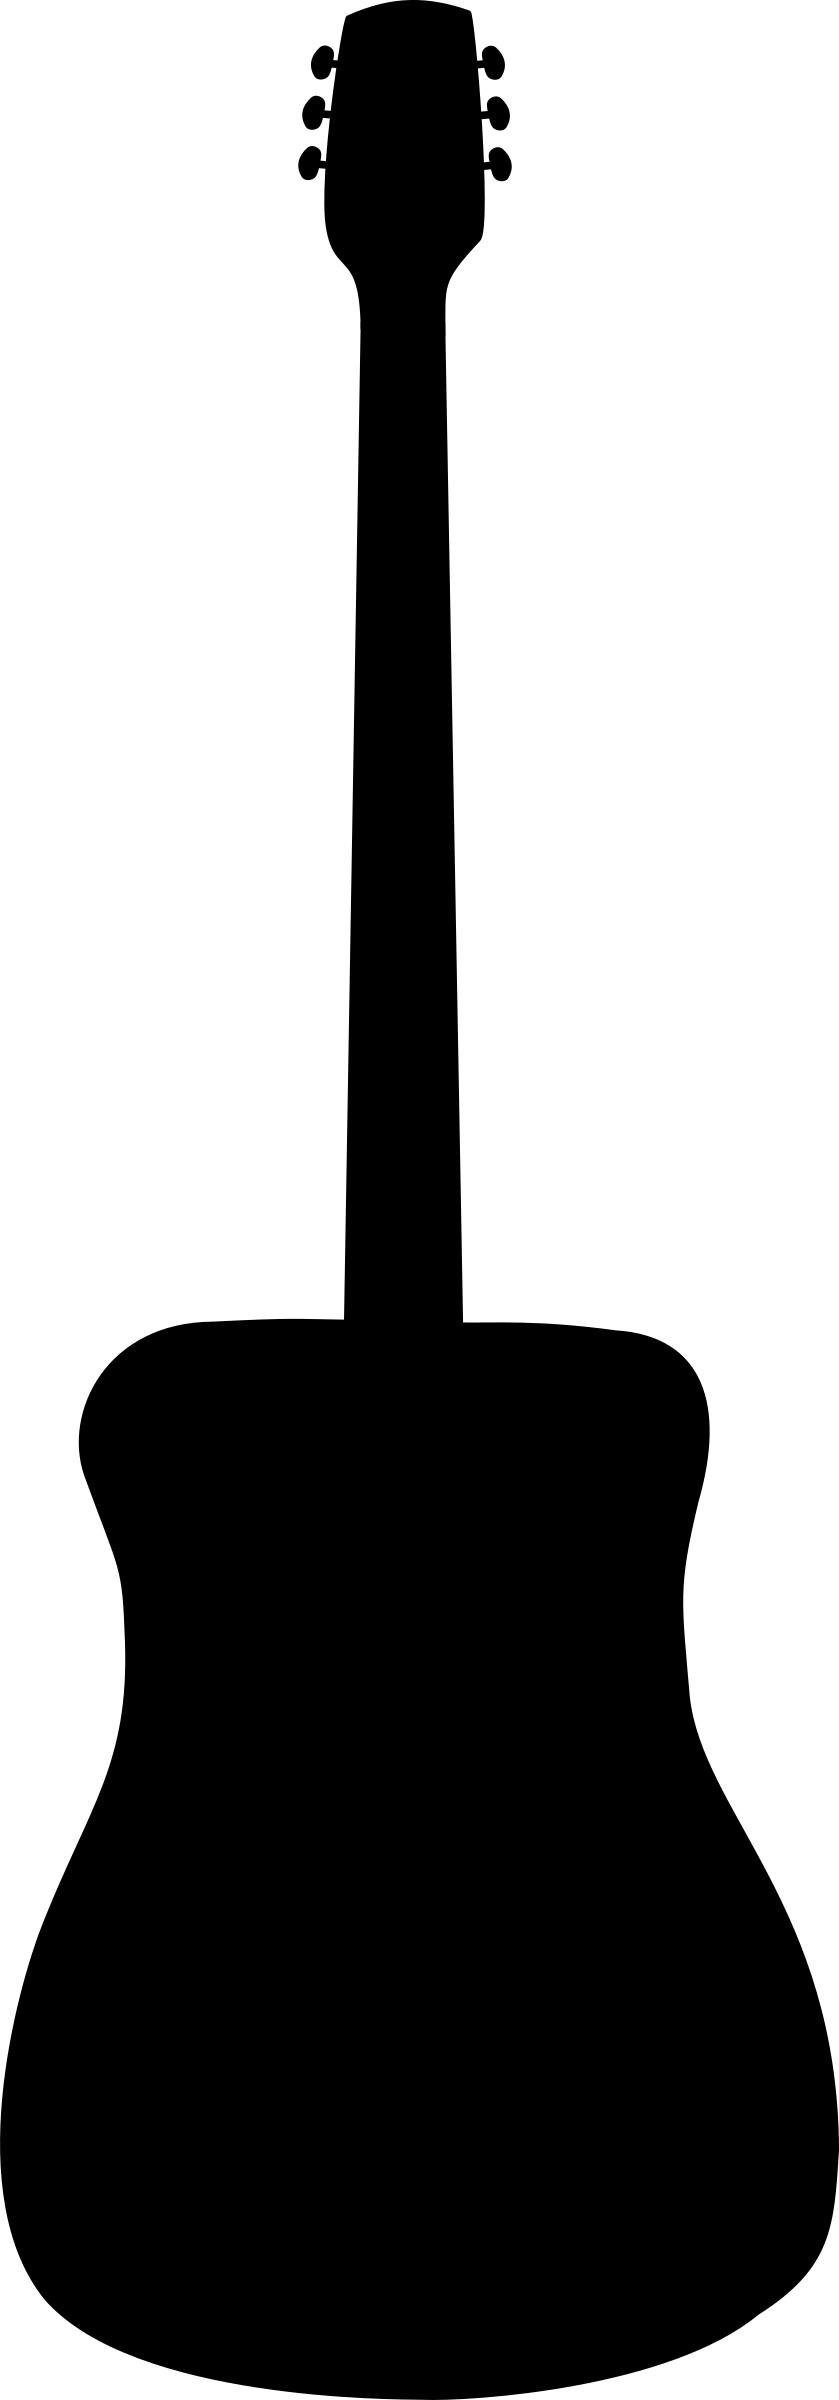 Acoustic guitar silhouette png